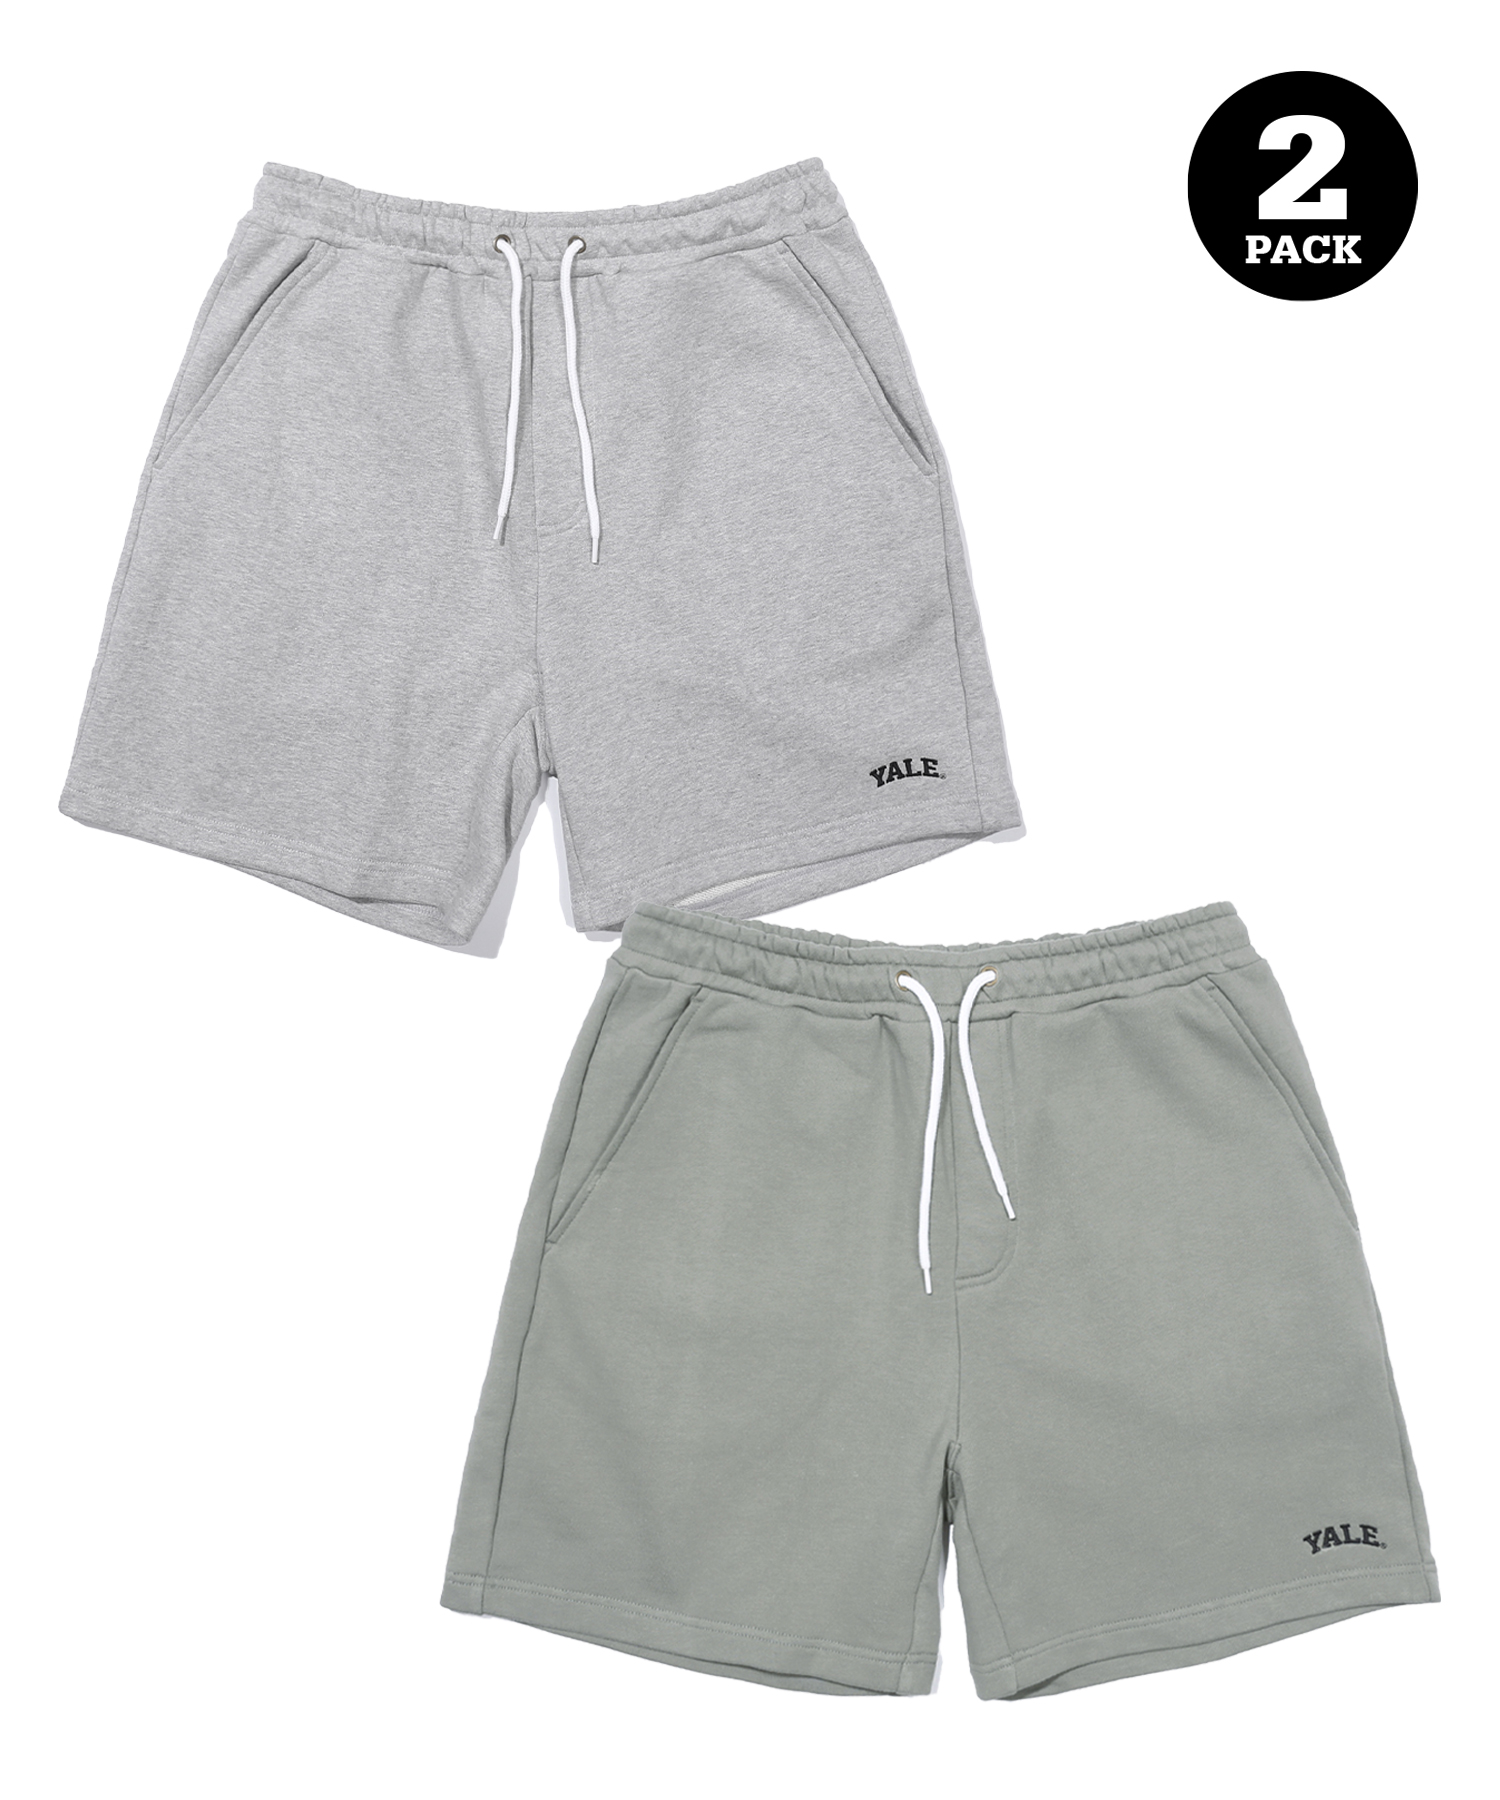 [ONEMILE WEAR] 2PACK SMALL ARCH SHORTS GRAY / KHAKI